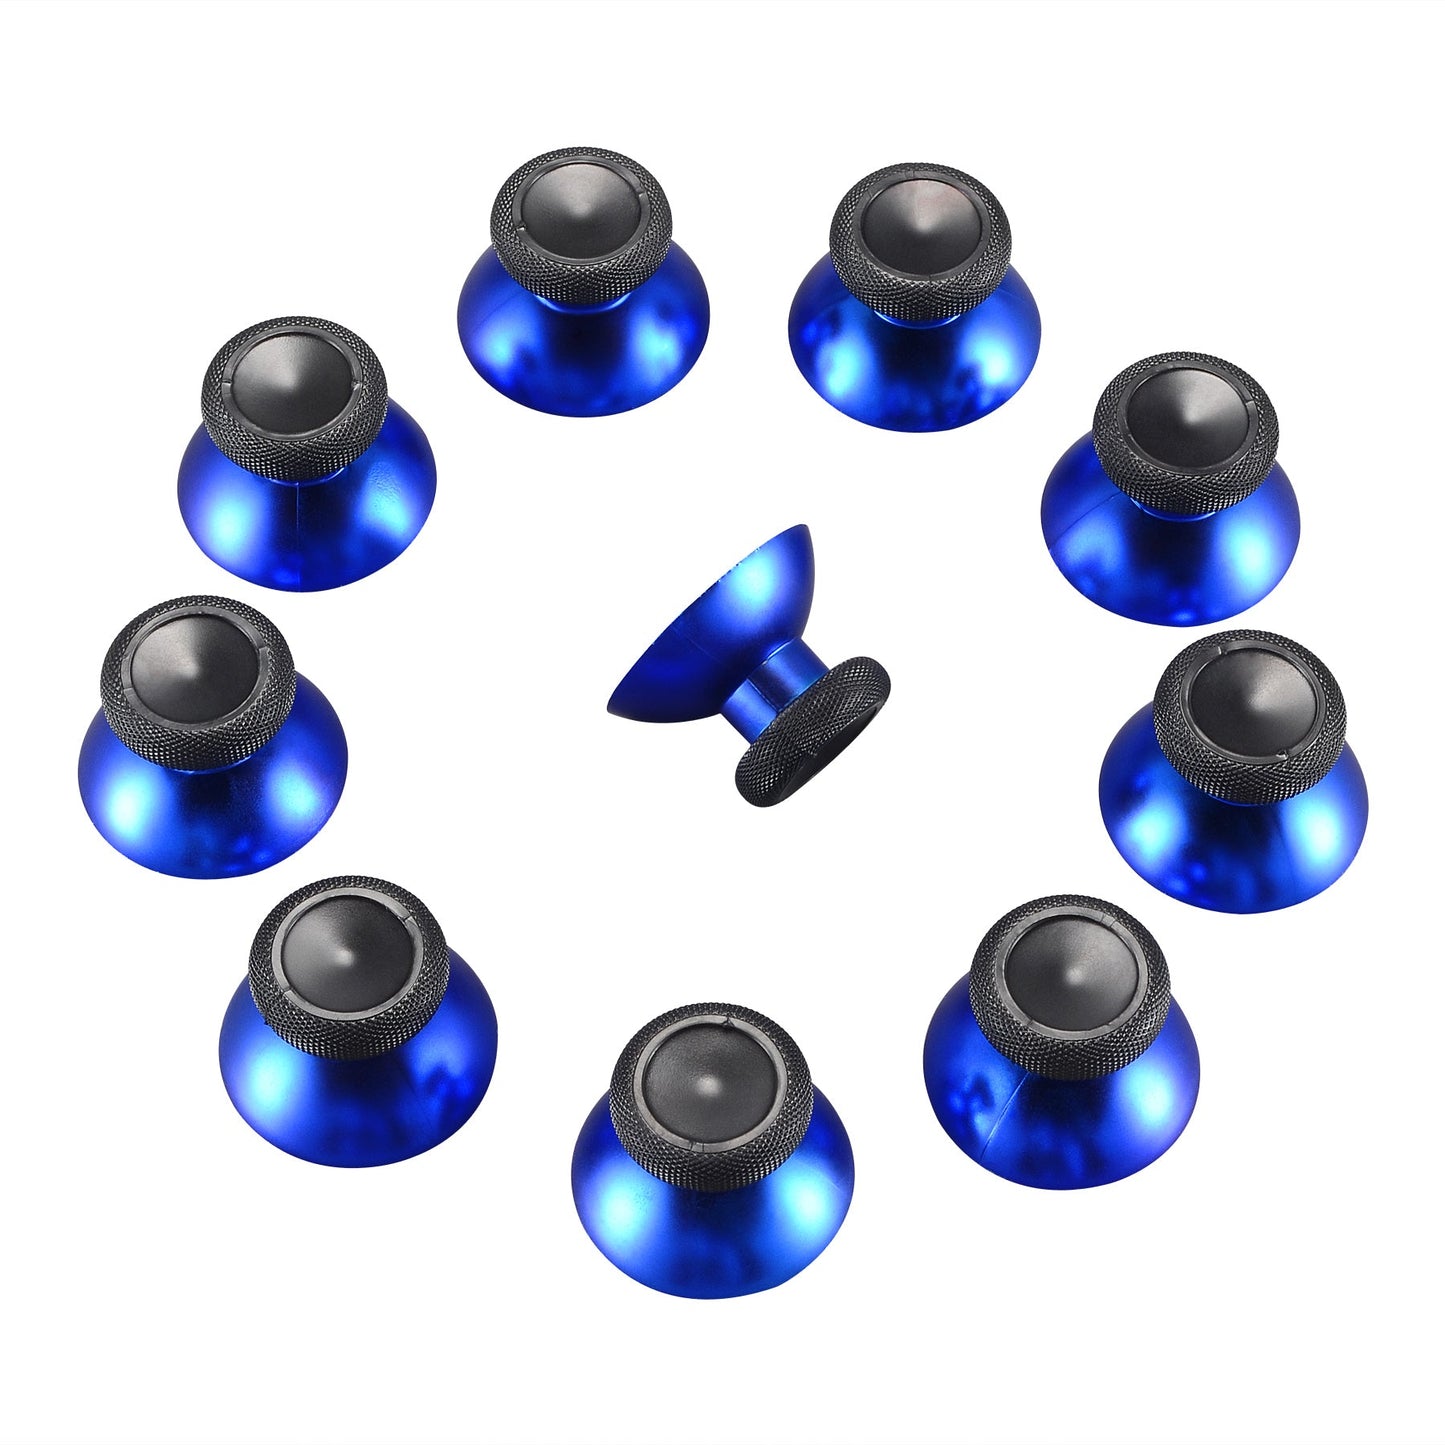 eXtremeRate Retail 10 pcs Rubberized Chrome Thumbsticks Analog Sticks Buttons Replacement Parts for Xbox One Xbox One X Xbox One S Controller (Blue) - XBHK0004GC